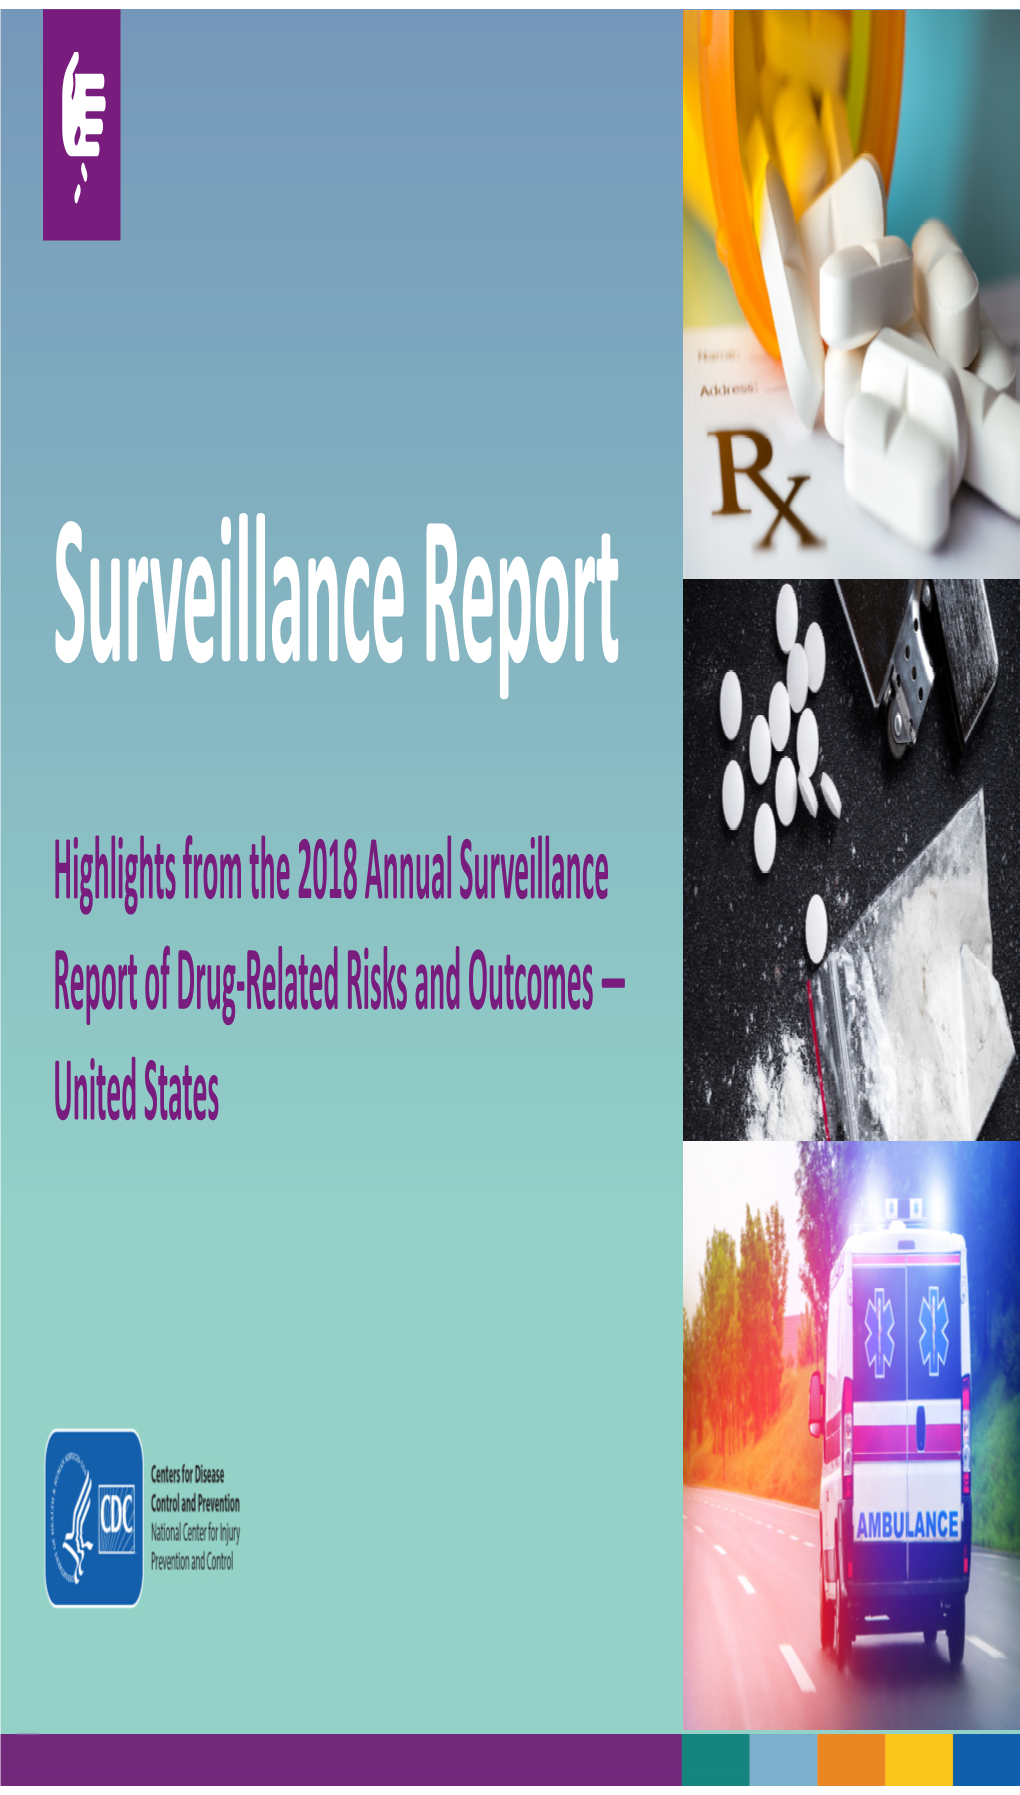 Highlights from the 2018 Annual Surveillance Report of Drug-Related Risks and Outcomes — United States Background